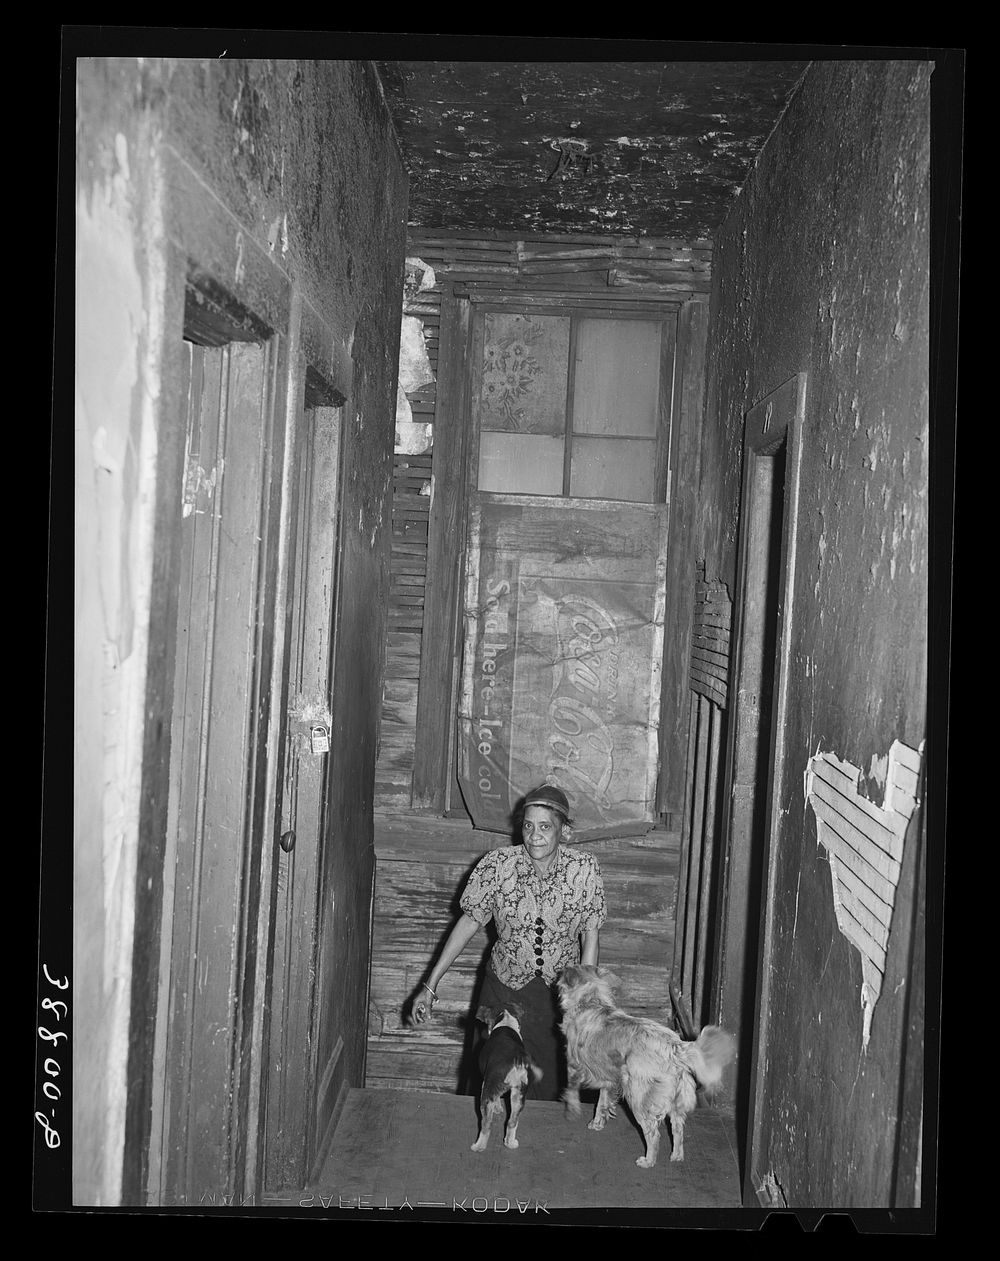 [Untitled photo, possibly related to: Entrance to second floor of rooming house. Chicago, Illinois] by Russell Lee